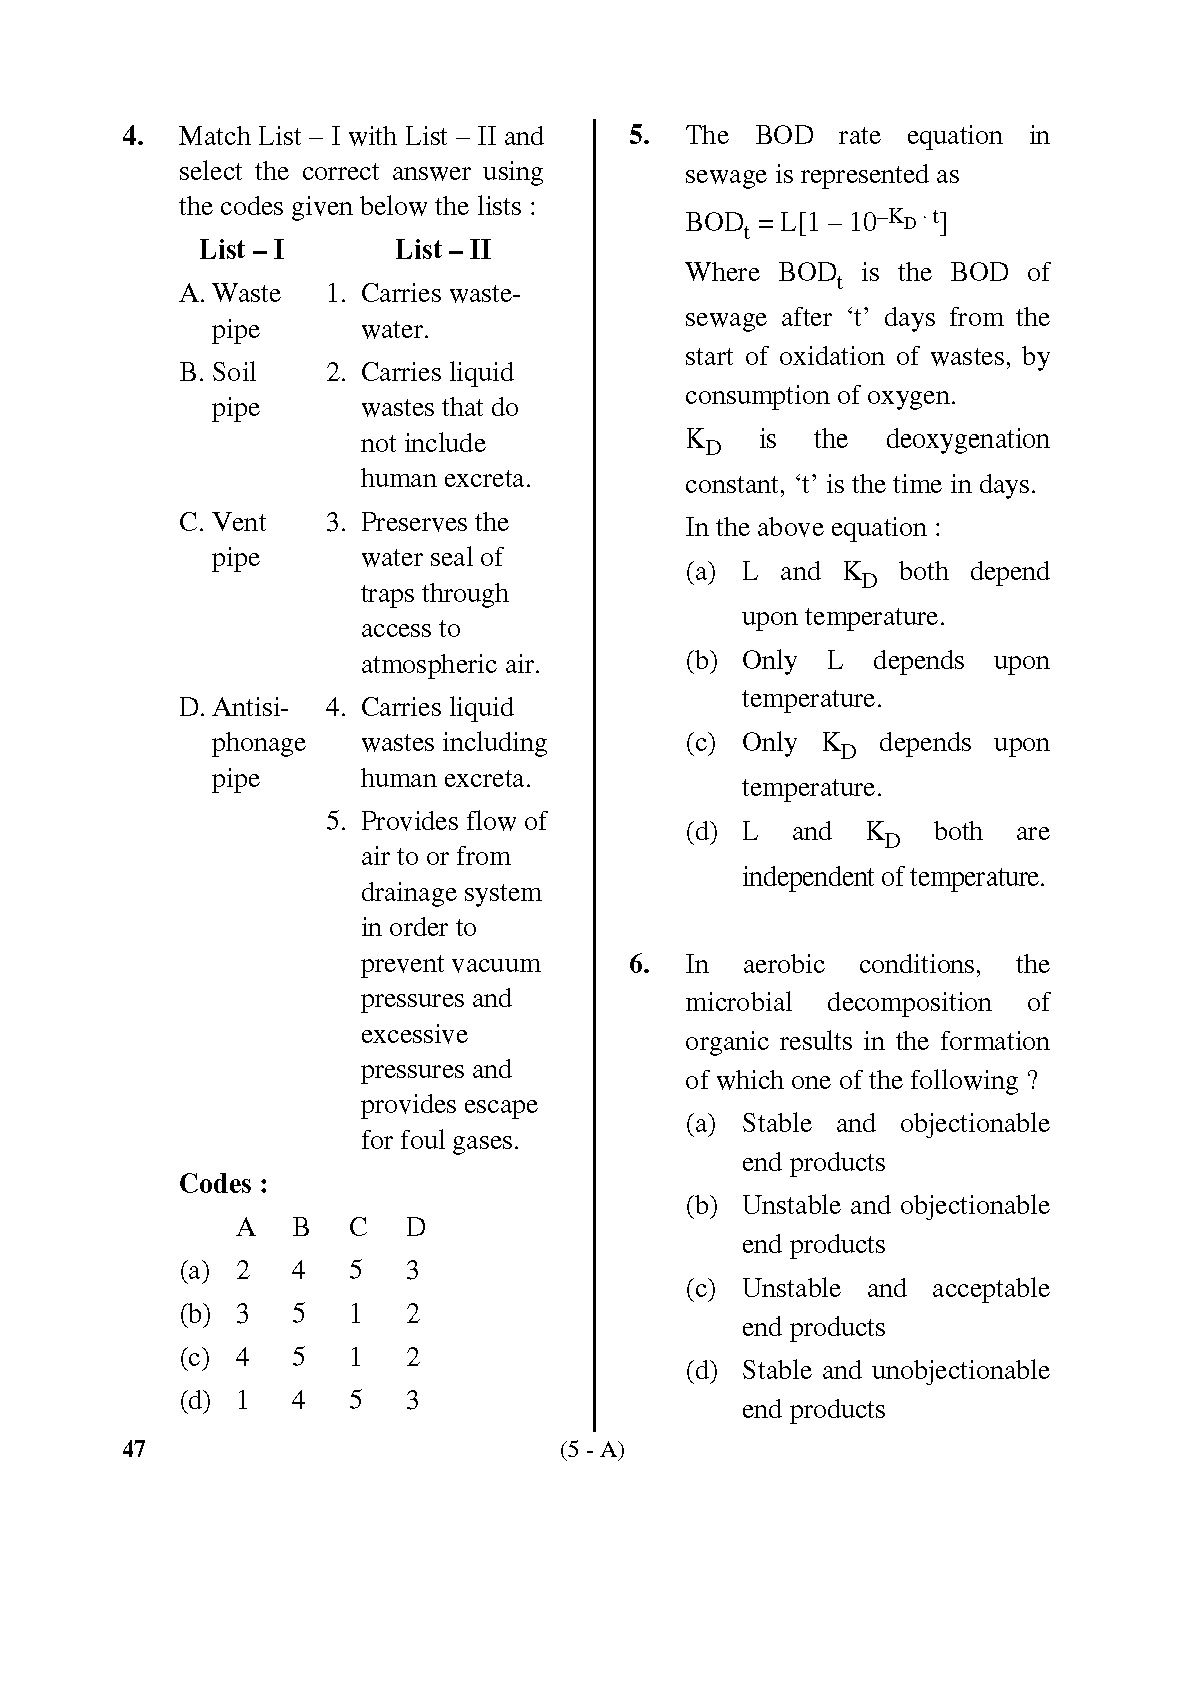 Karnataka PSC Town Planners Exam Sample Question Paper 4